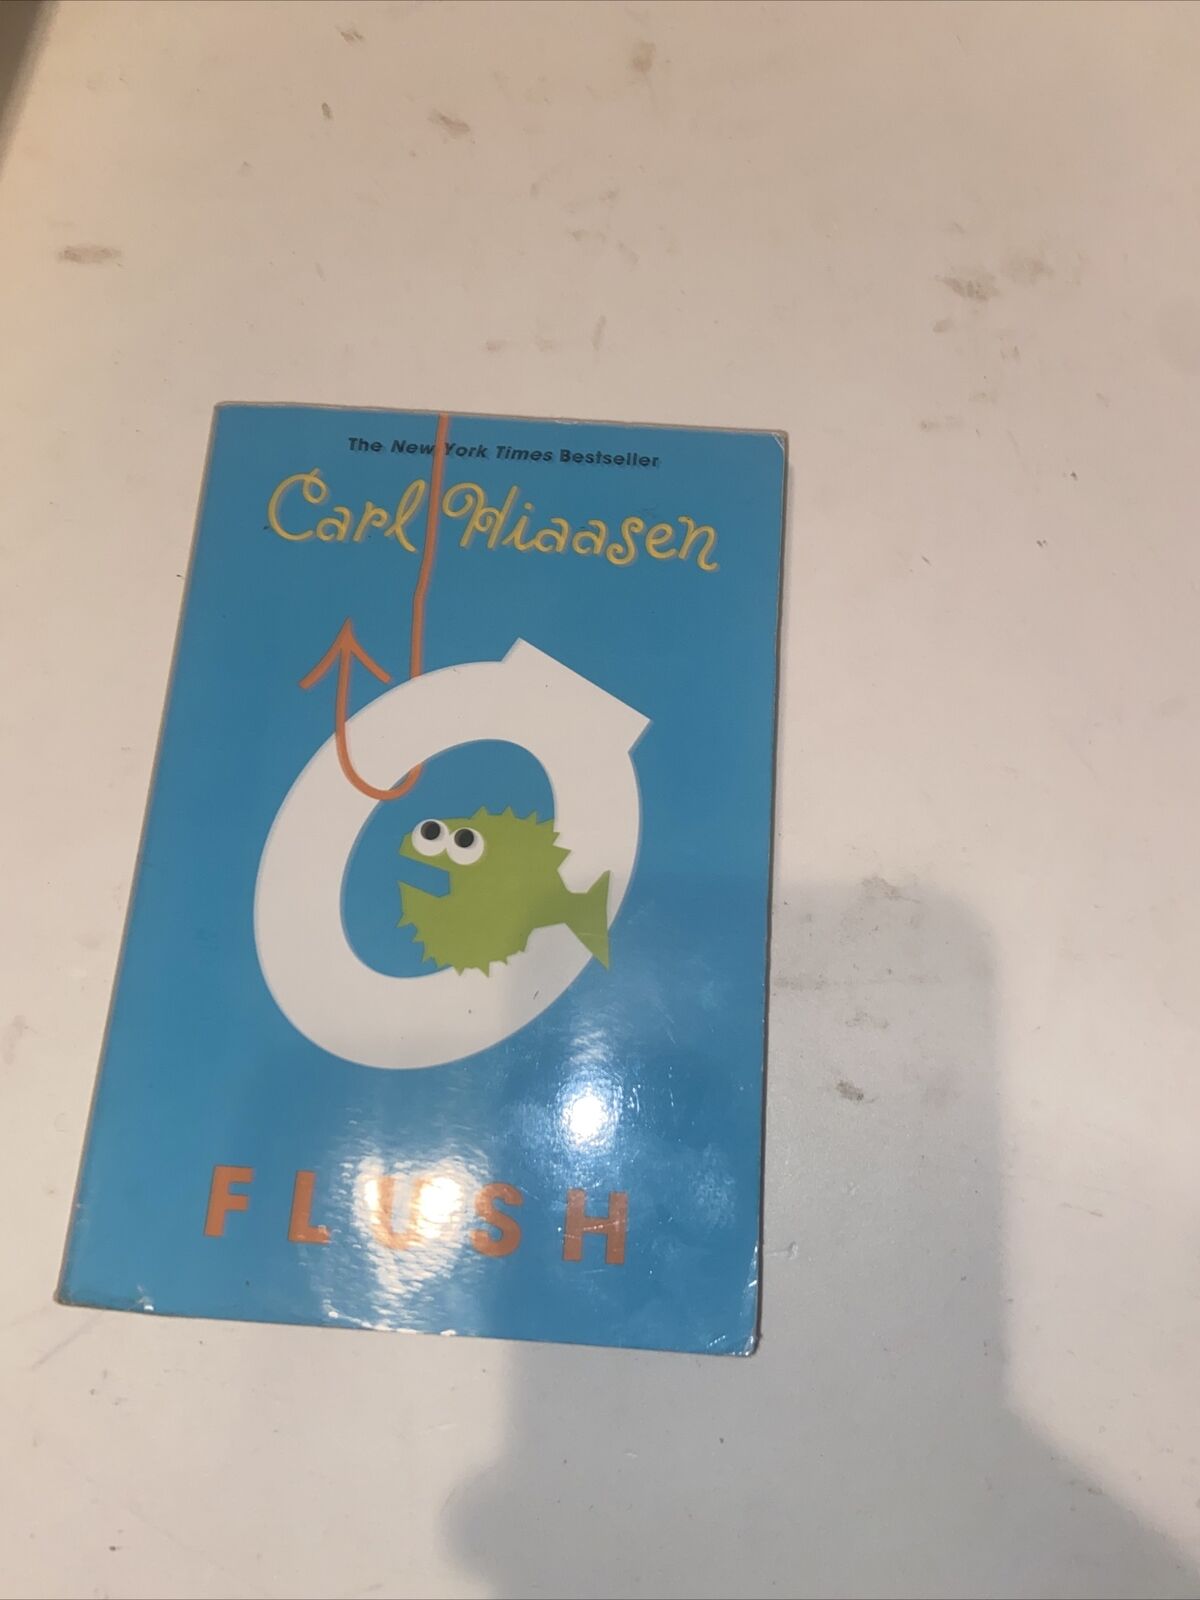 Flush - A Hilarious and Thrilling Adventure by Carl Hiaasen, New York Times Bestselling Author